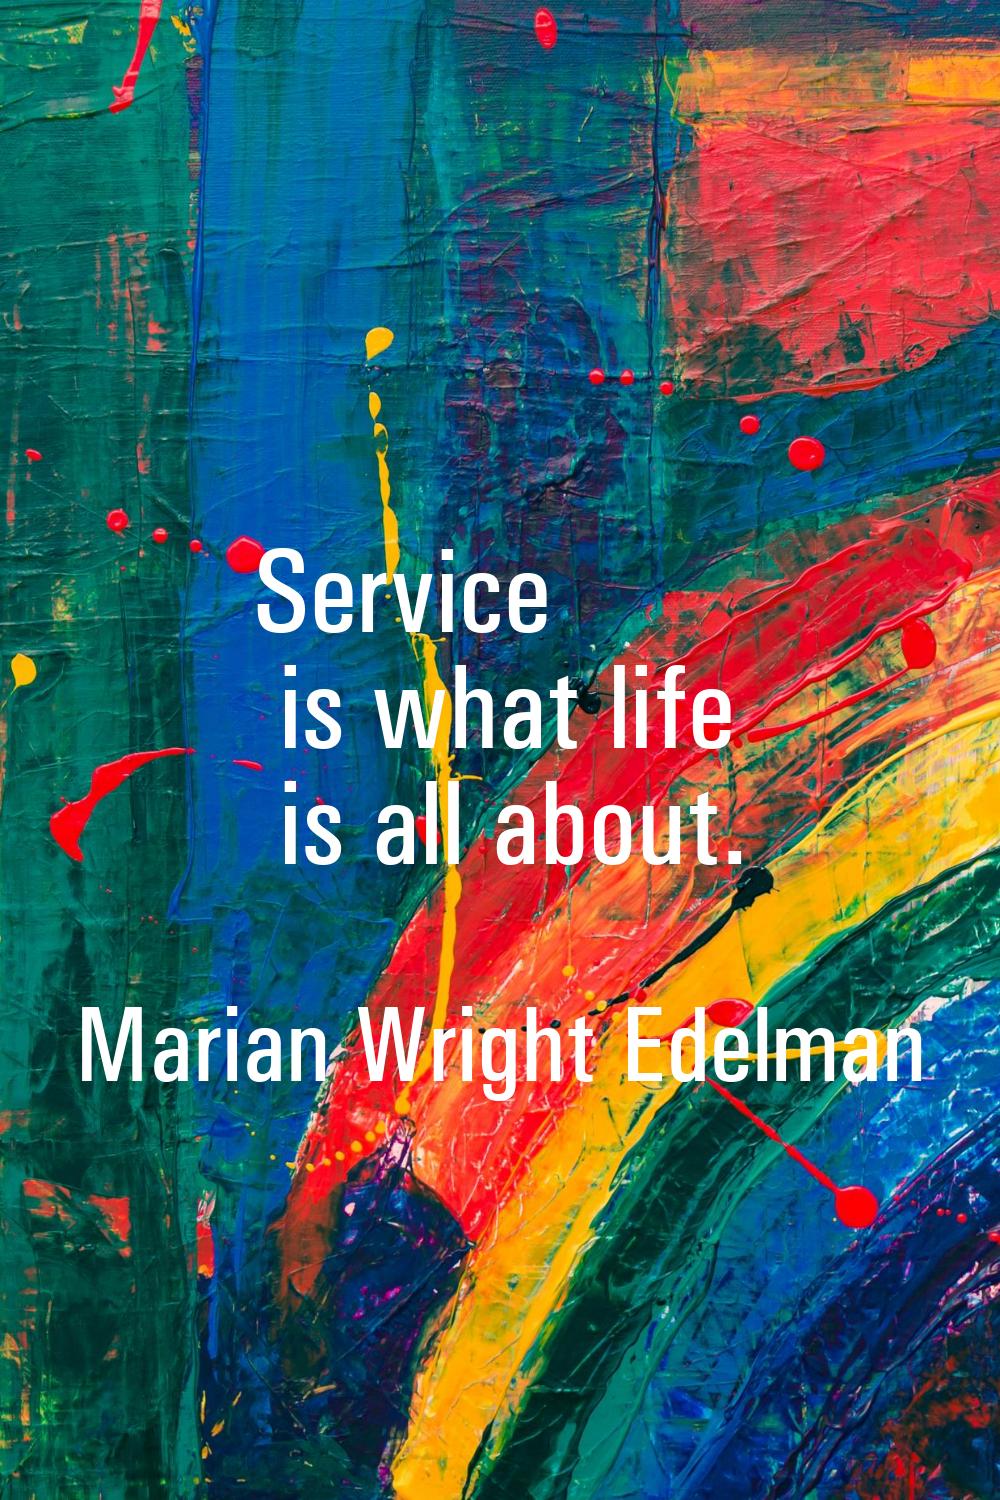 Service is what life is all about.